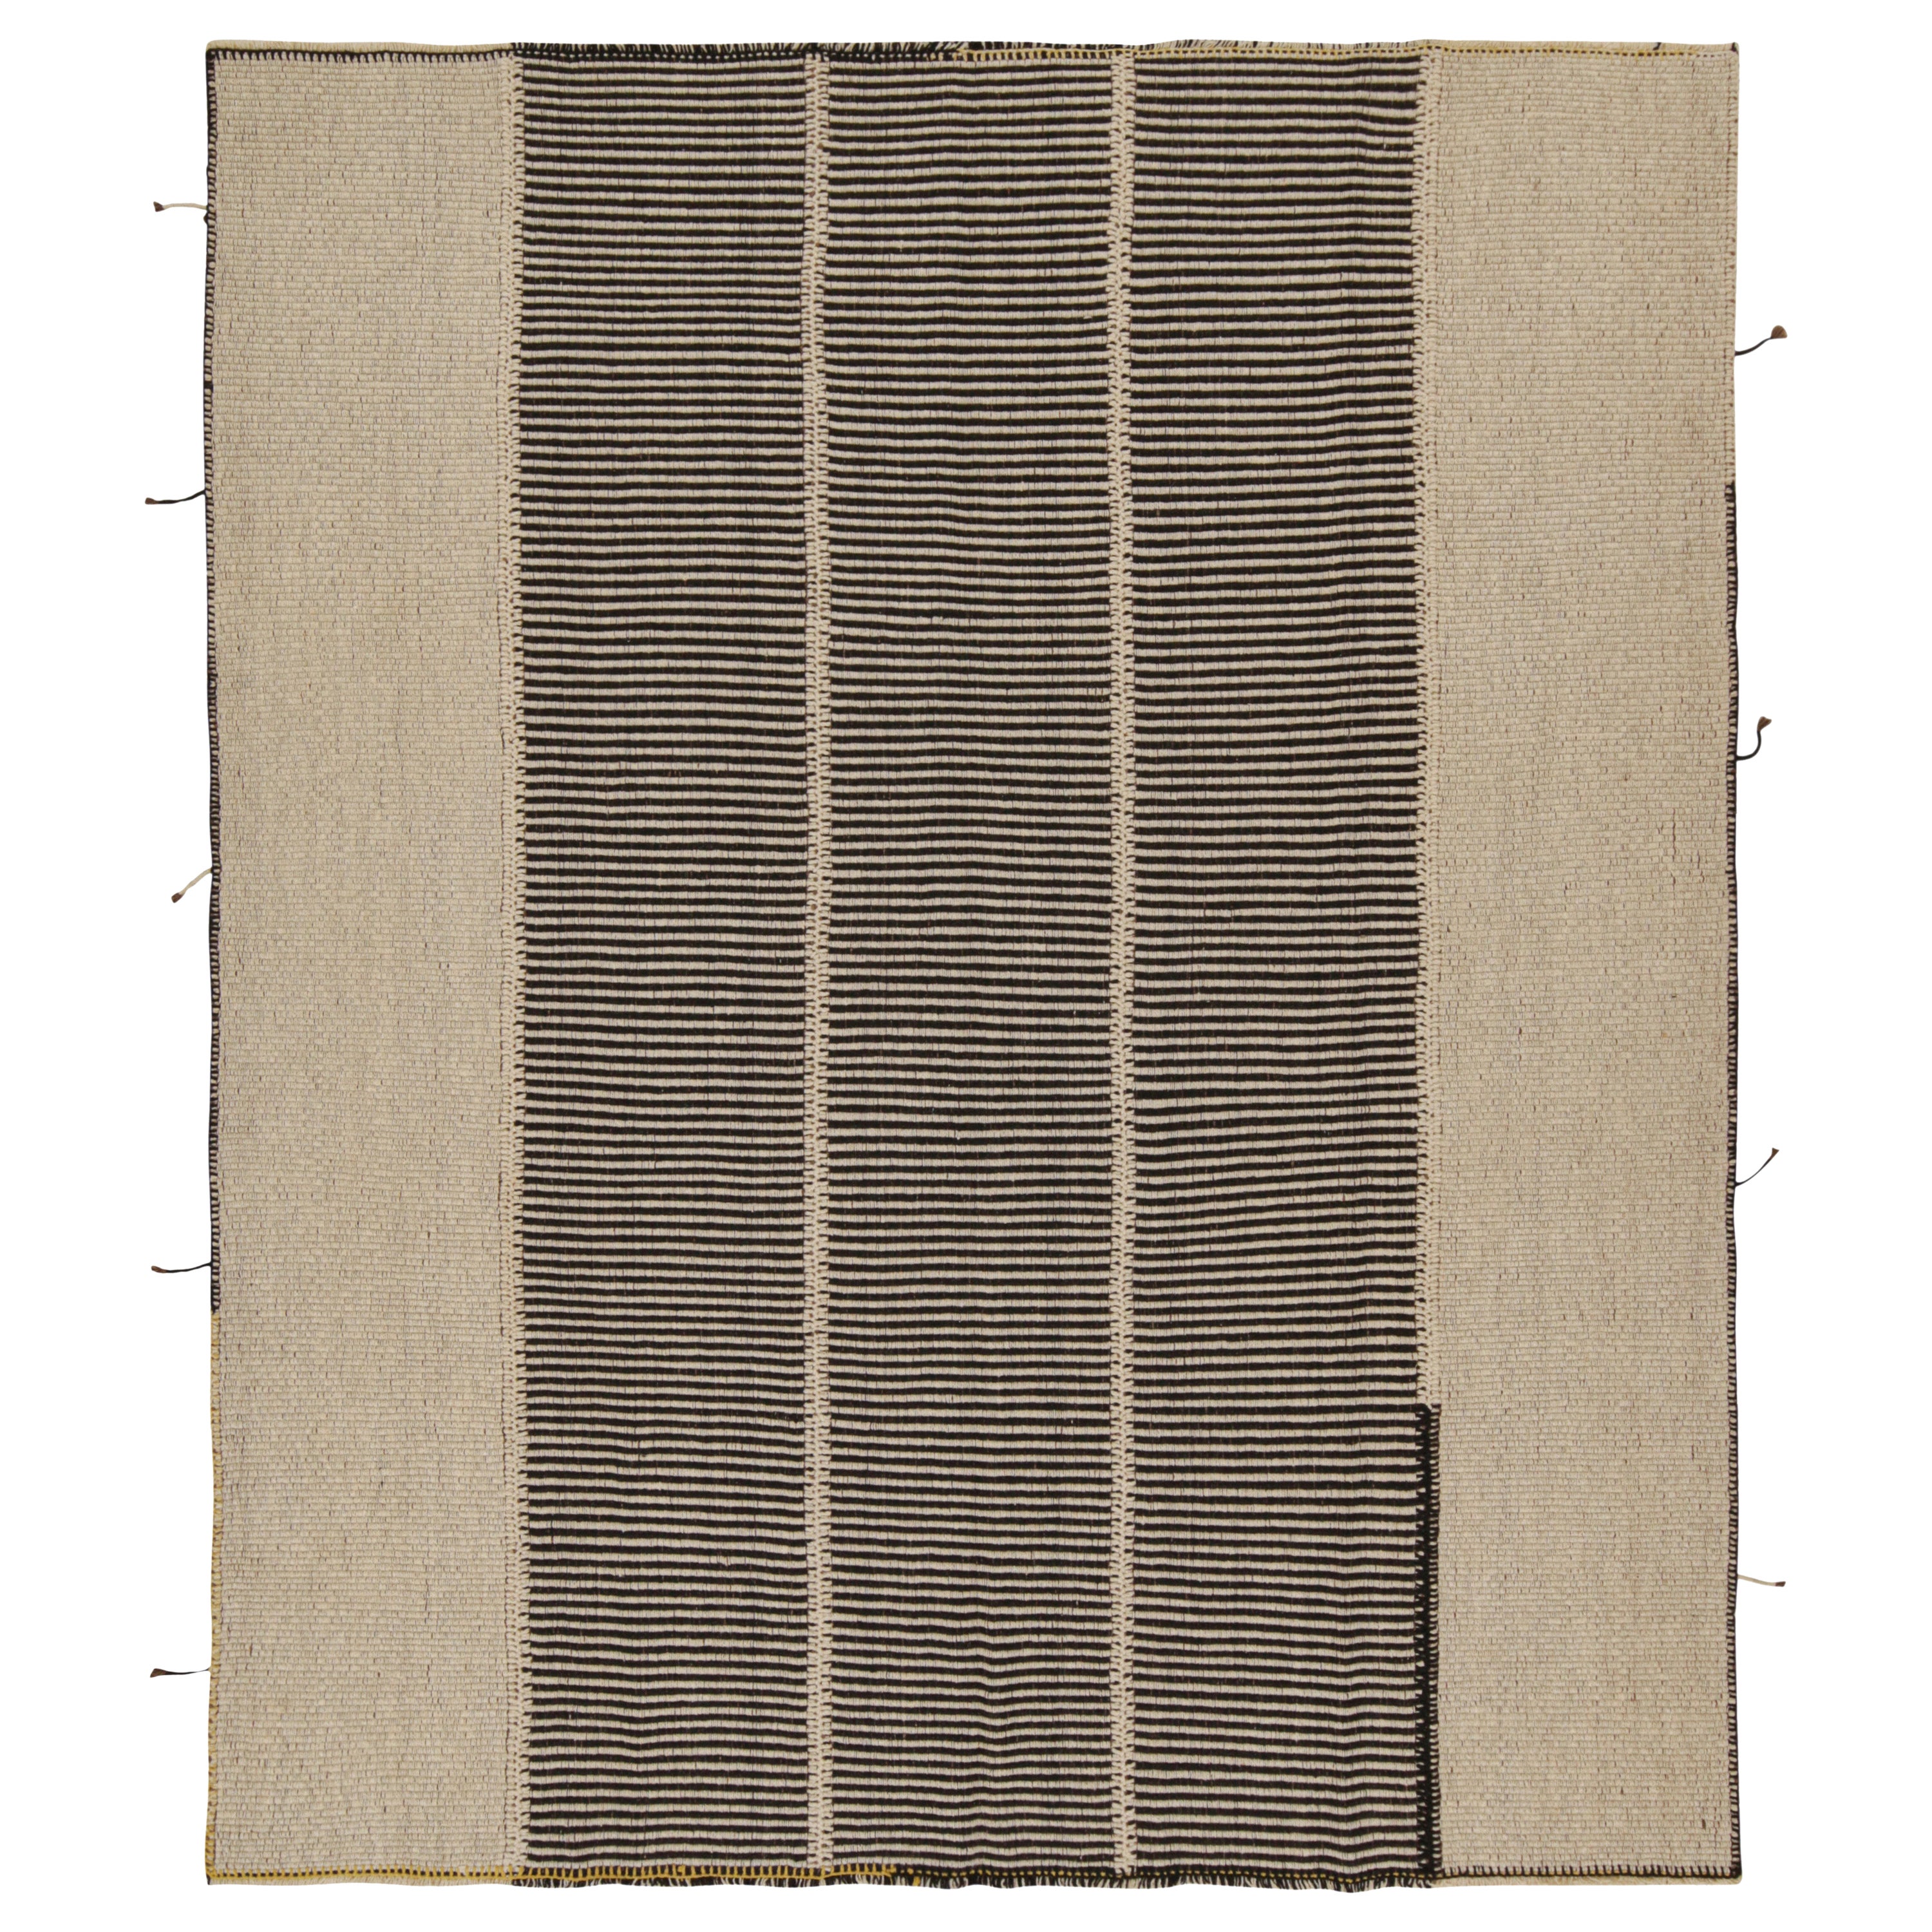 Rug & Kilim’s Contemporary Kilim in Black & Beige Stripes with Brown Accents For Sale